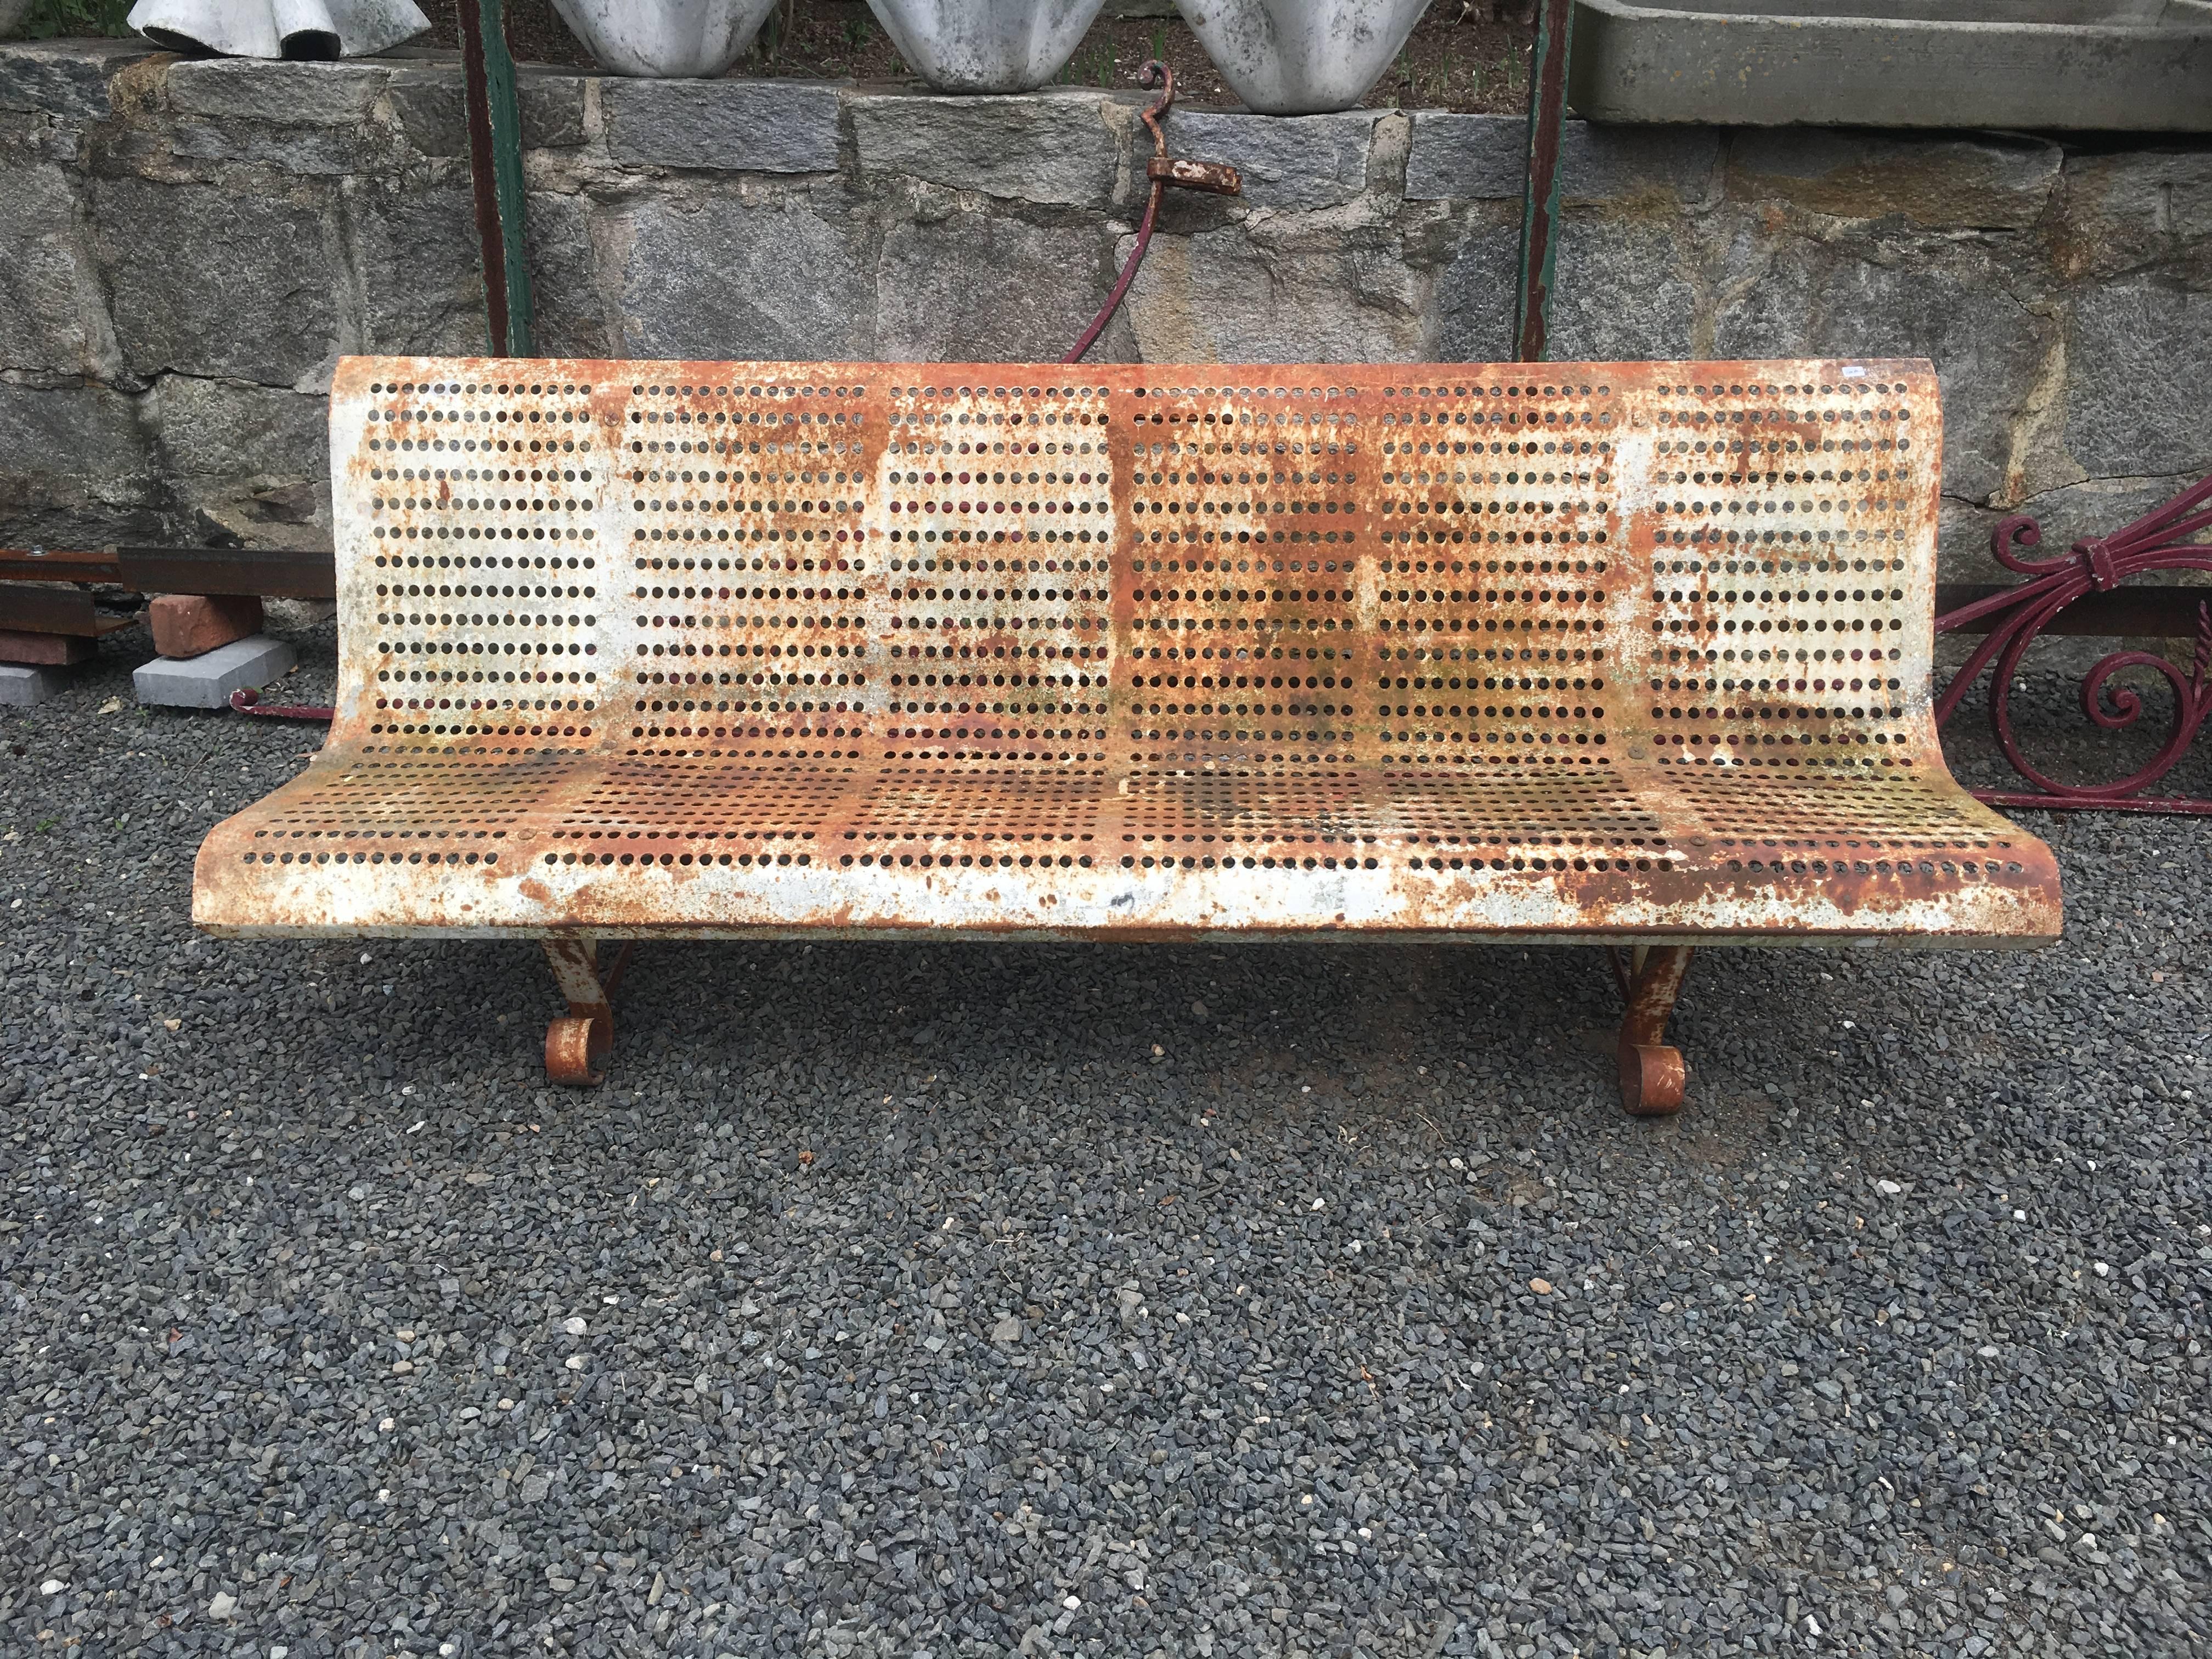 What a great example of French Mid-Century Modern design! Constructed of steel and with a beautiful lightly rusted patina with some original white paint showing through, this bench is the perfect complement to a contemporary garden. Commodious and